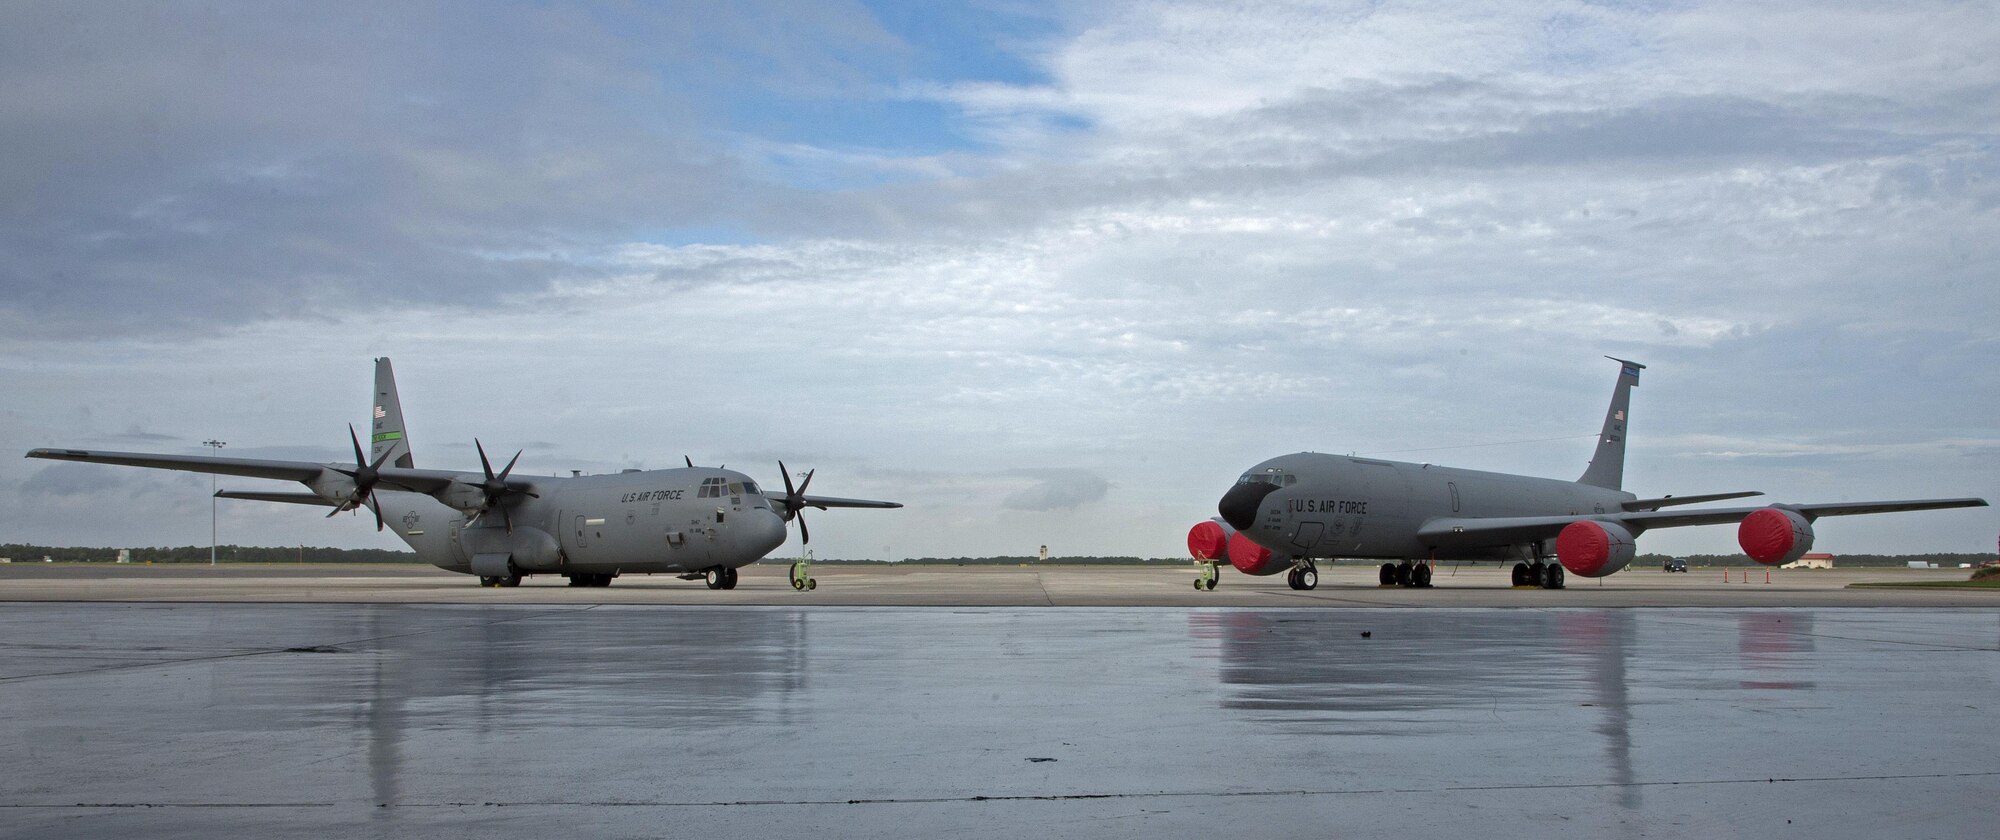 A C-130 Hercules aircraft and a KC-135 Stratotanker aircraft sit on the flightline during an assumption of command ceremony for the 50th Air Refueling Squadron (ARS) at MacDill Air Force Base, Fla., Oct. 2, 2017.